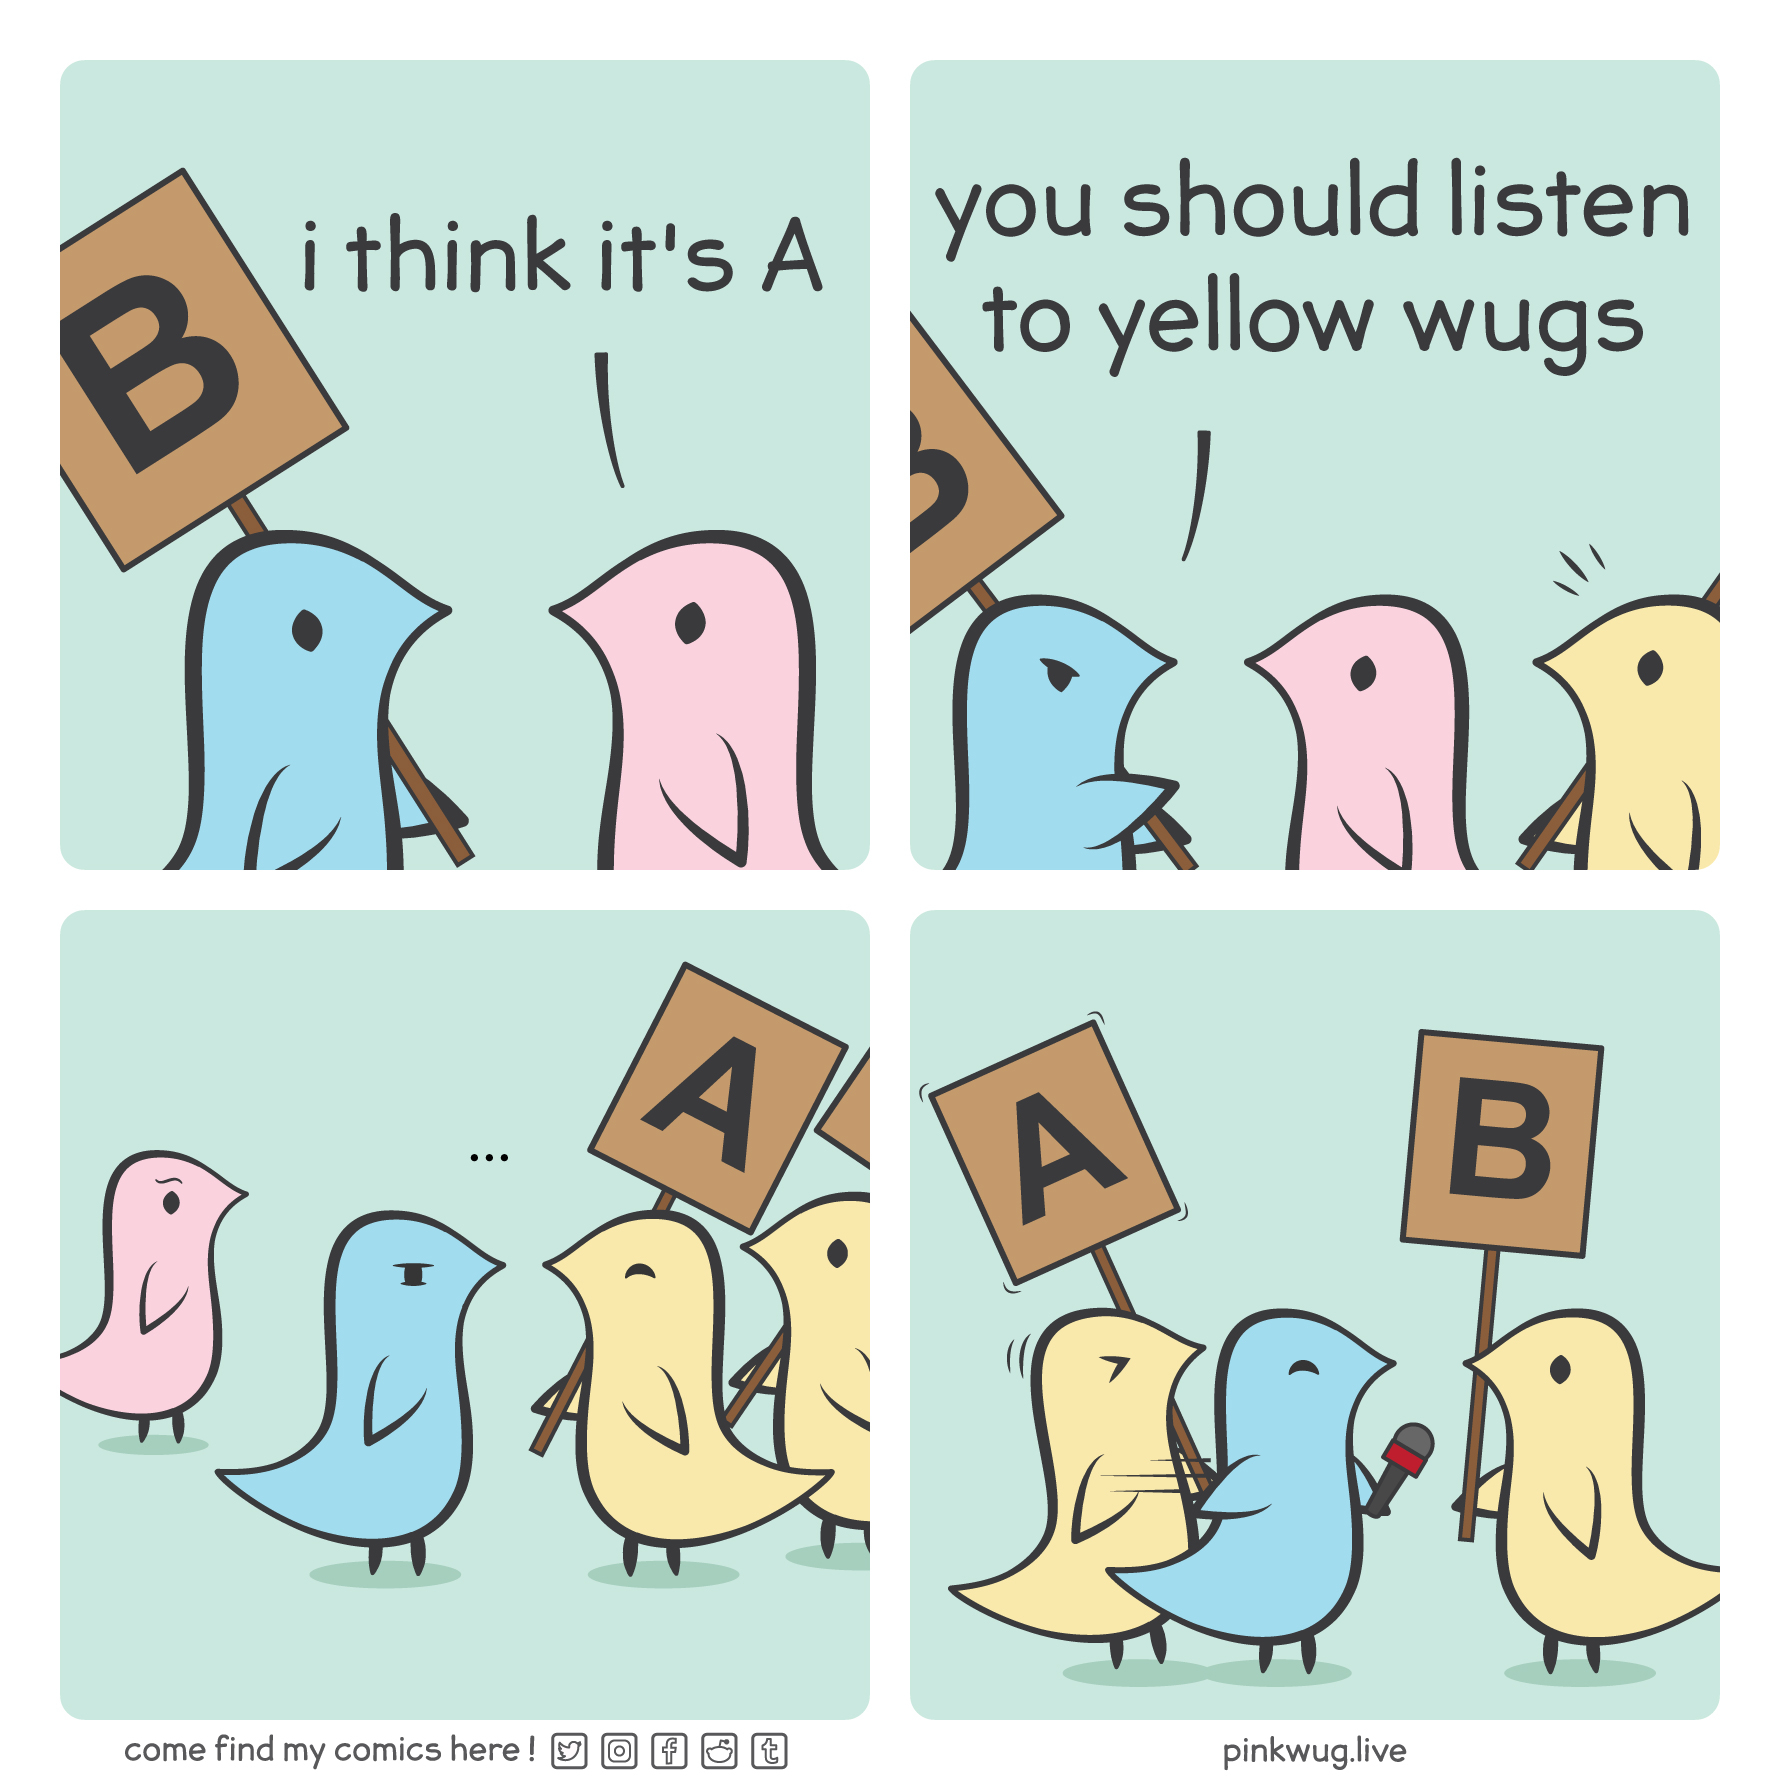 pinkwug comic: Panel 1: a pink wug tells a blue wug holding a sign with B written on it: "i think it's A"

Panel 2: the blue wug angrily points at a yellow wug behind the pink wug and says: "you should listen to yellow wugs"

Panel 3: the blue wug realizes that the yellow wug is holding up a sign with A written on it.

Panel 4: the blue wug shoves the yellow wug holding the A sign aside to give a microphone to the yellow wug holding a B sign.